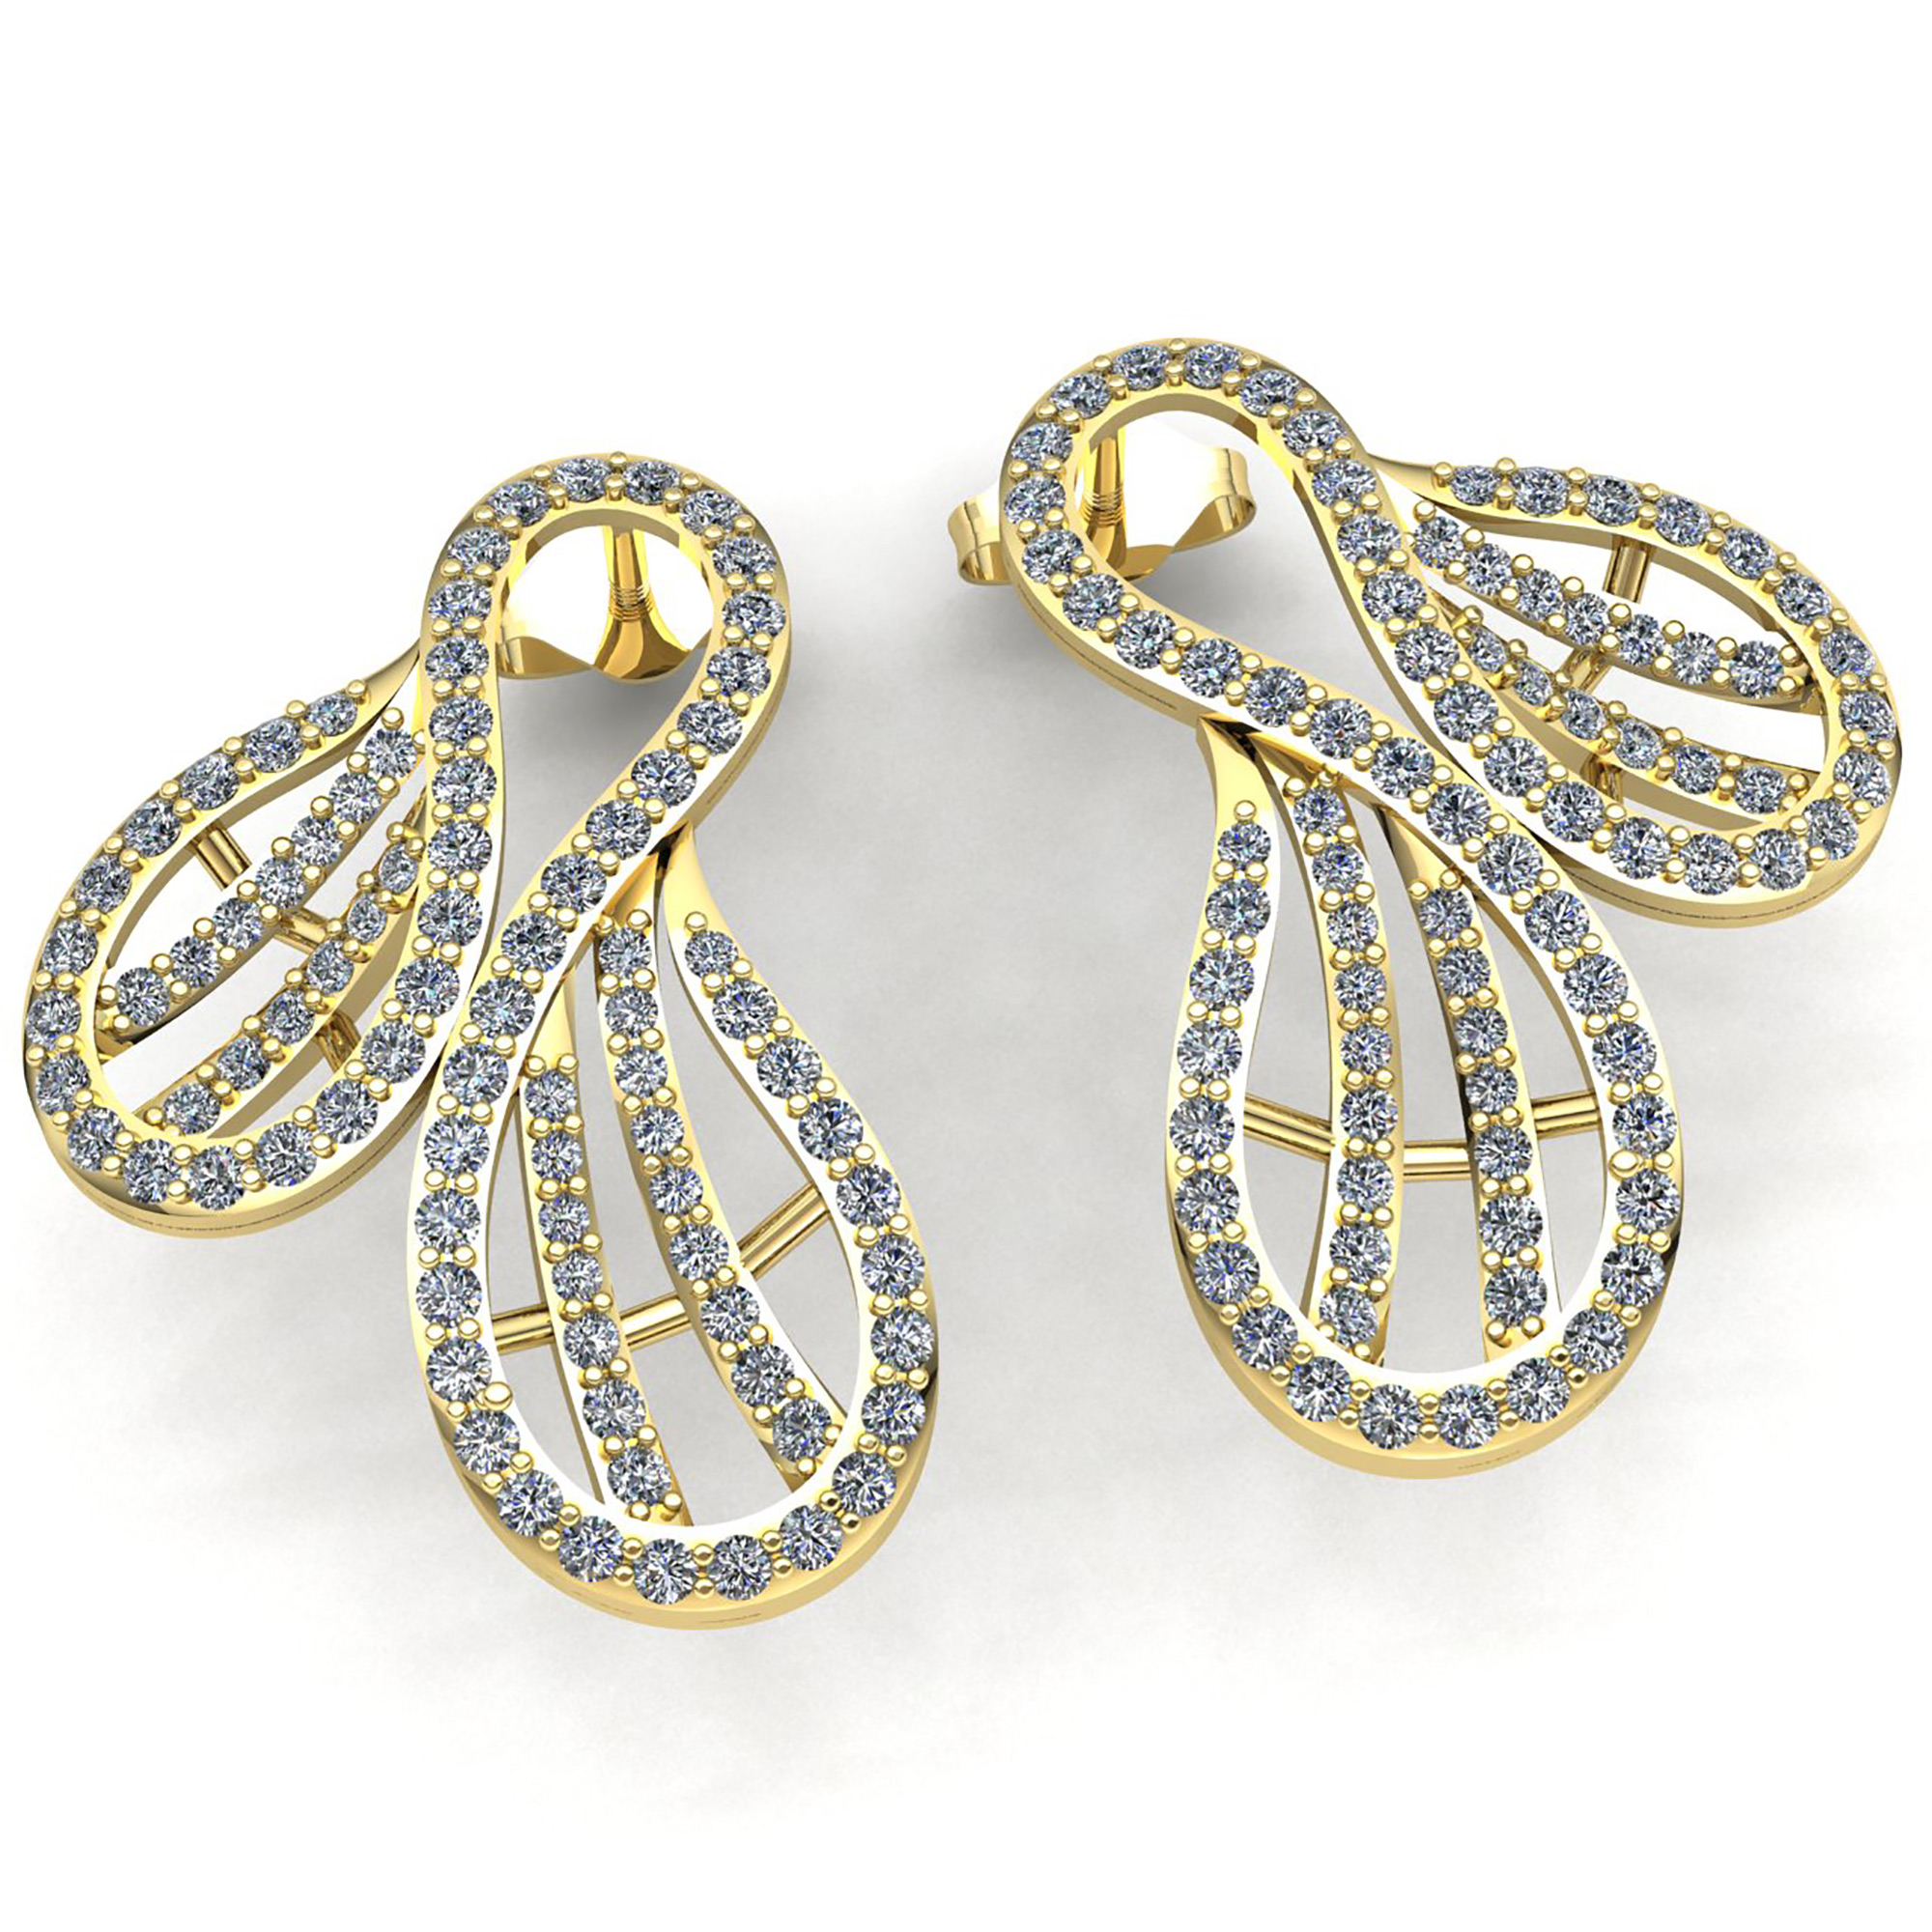 Jewel We Sell Genuine 1ct Round Cut Diamond Ladies Unique Twisted Stud Earrings Solid 18K White, Yellow, or Rose Gold F VS1